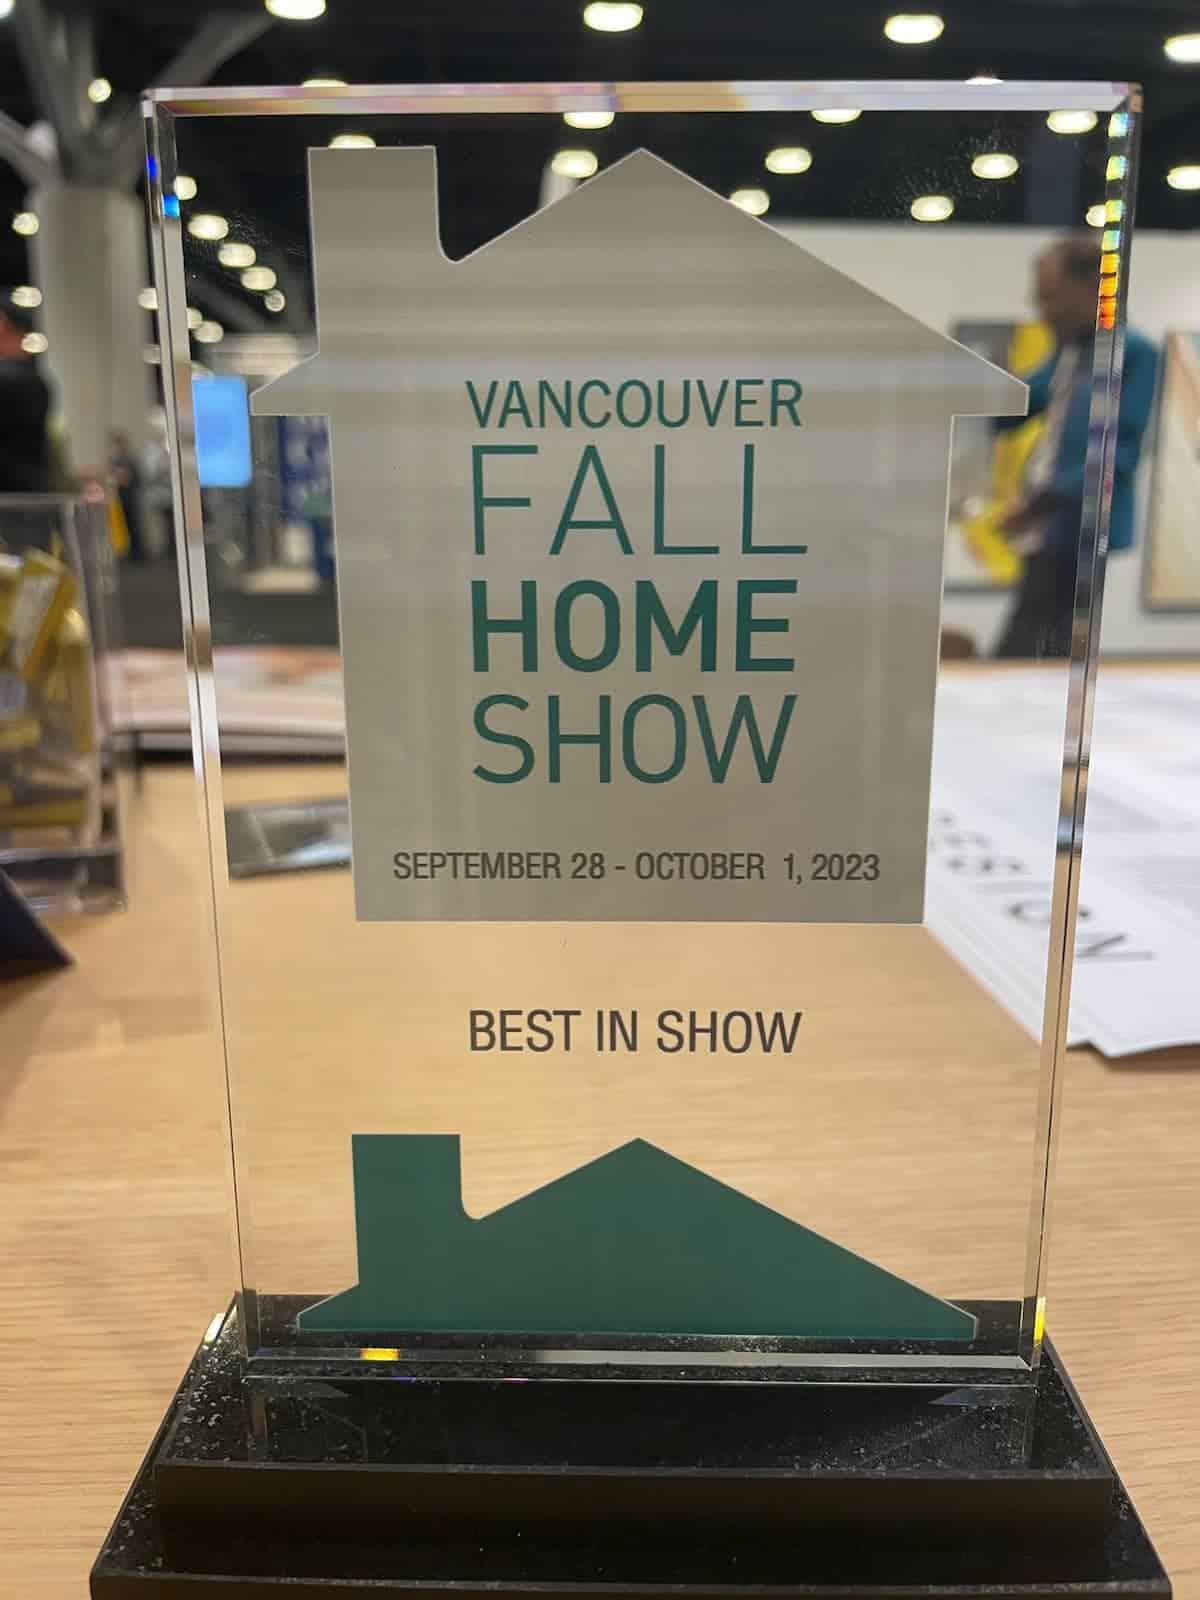 Kerr Design Build Shines at Vancouver Fall Home Show with “Best in Show” Award-Winning Booth